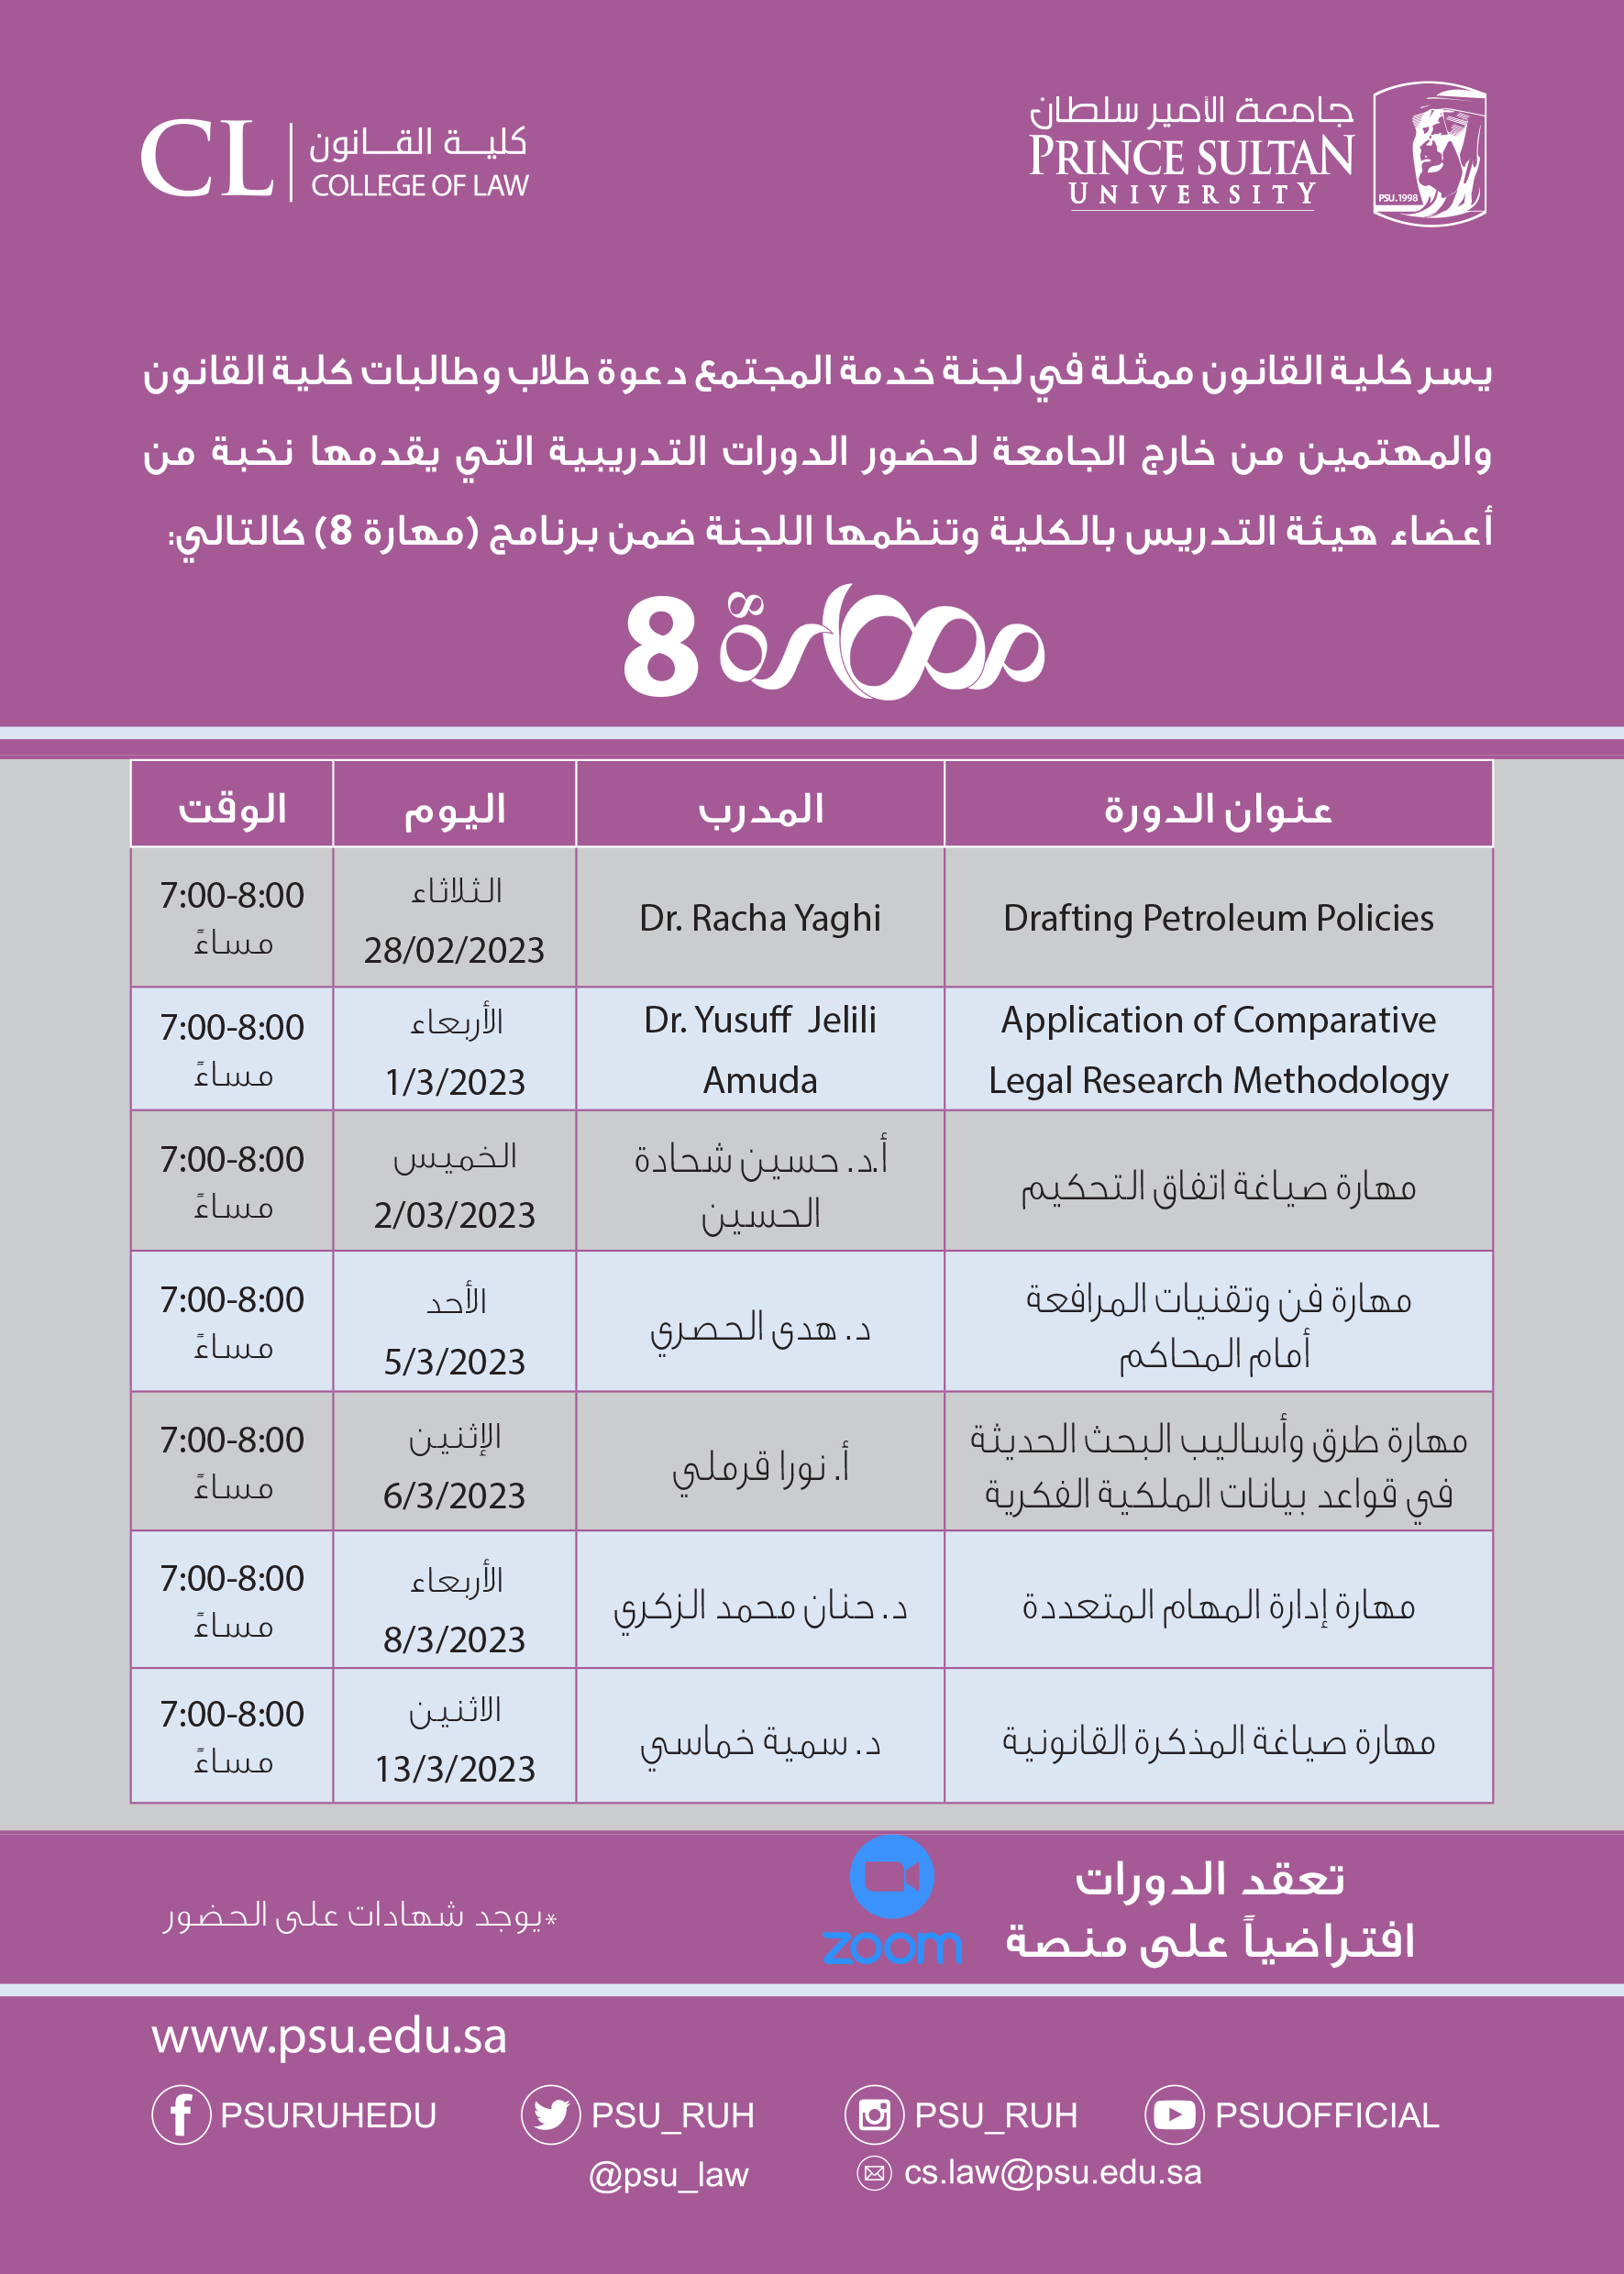 The College of Law at Prince Sultan University is pleased to Announce the New Mahara 8 Program for this Semester. The Program Includes 7 Workshops on Various Topics.